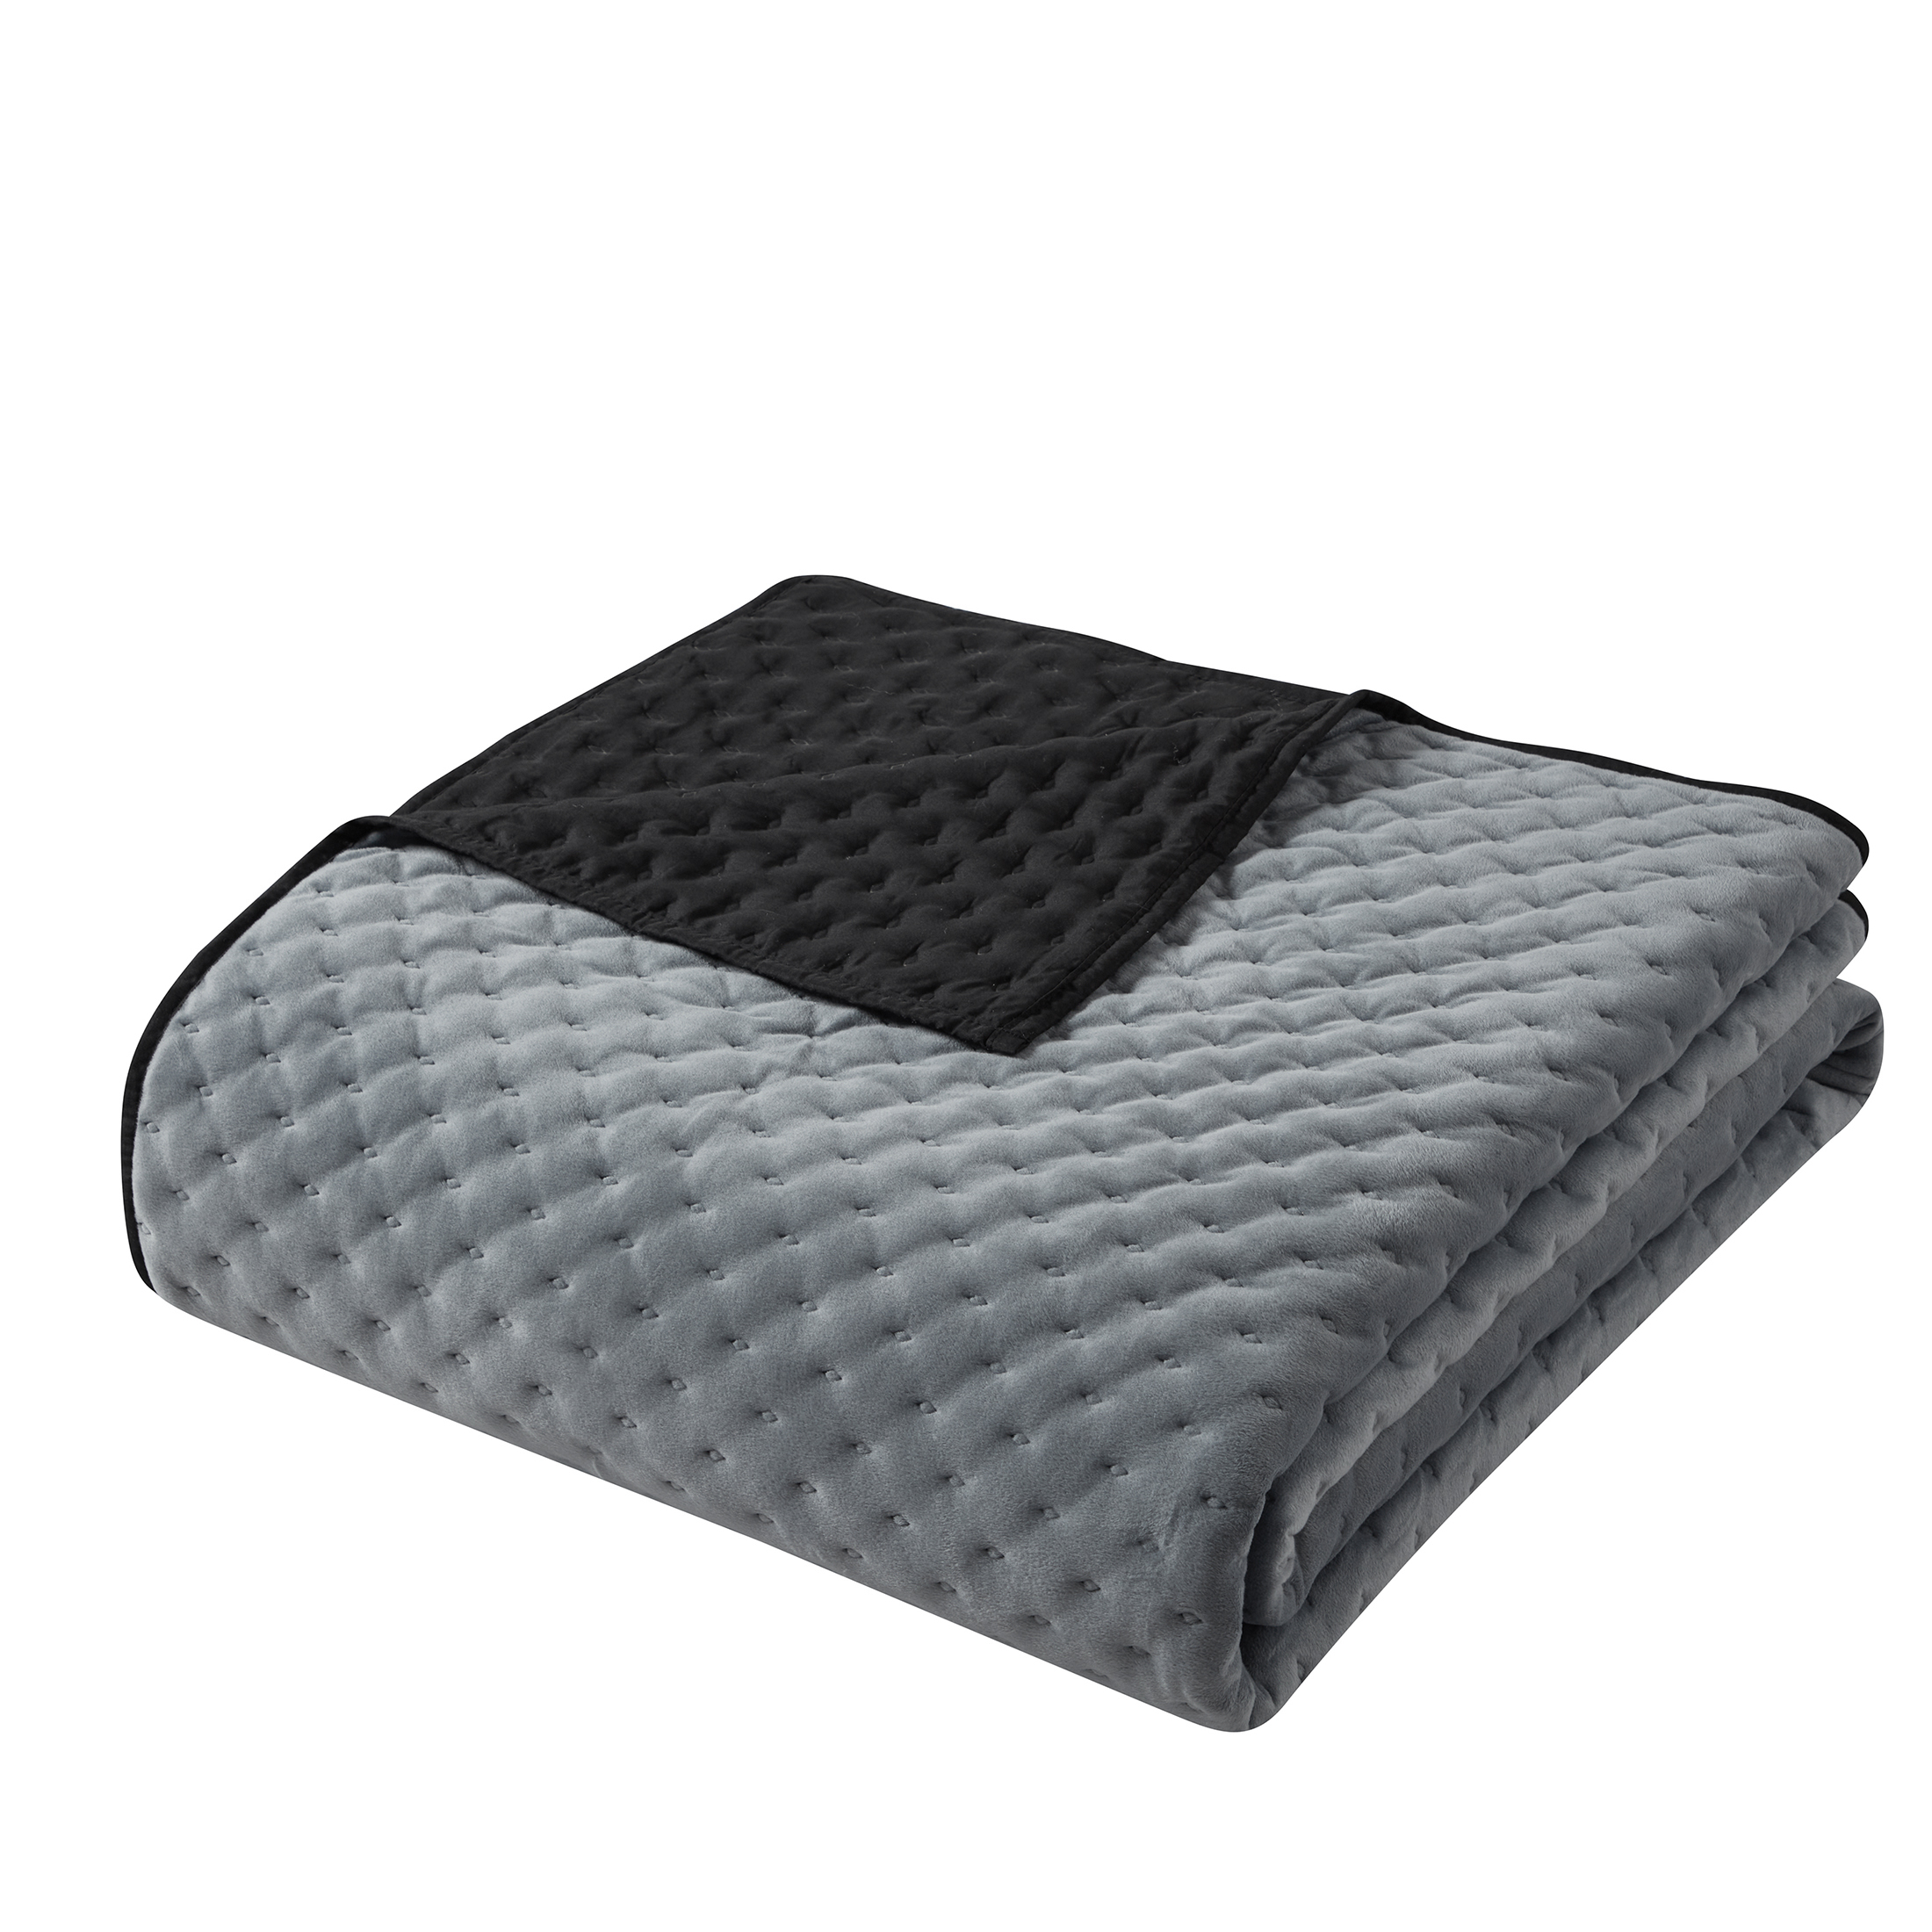 Mainstays Grey Mink Polyester Quilt, Full/Queen, Adult, Reversible - image 4 of 7